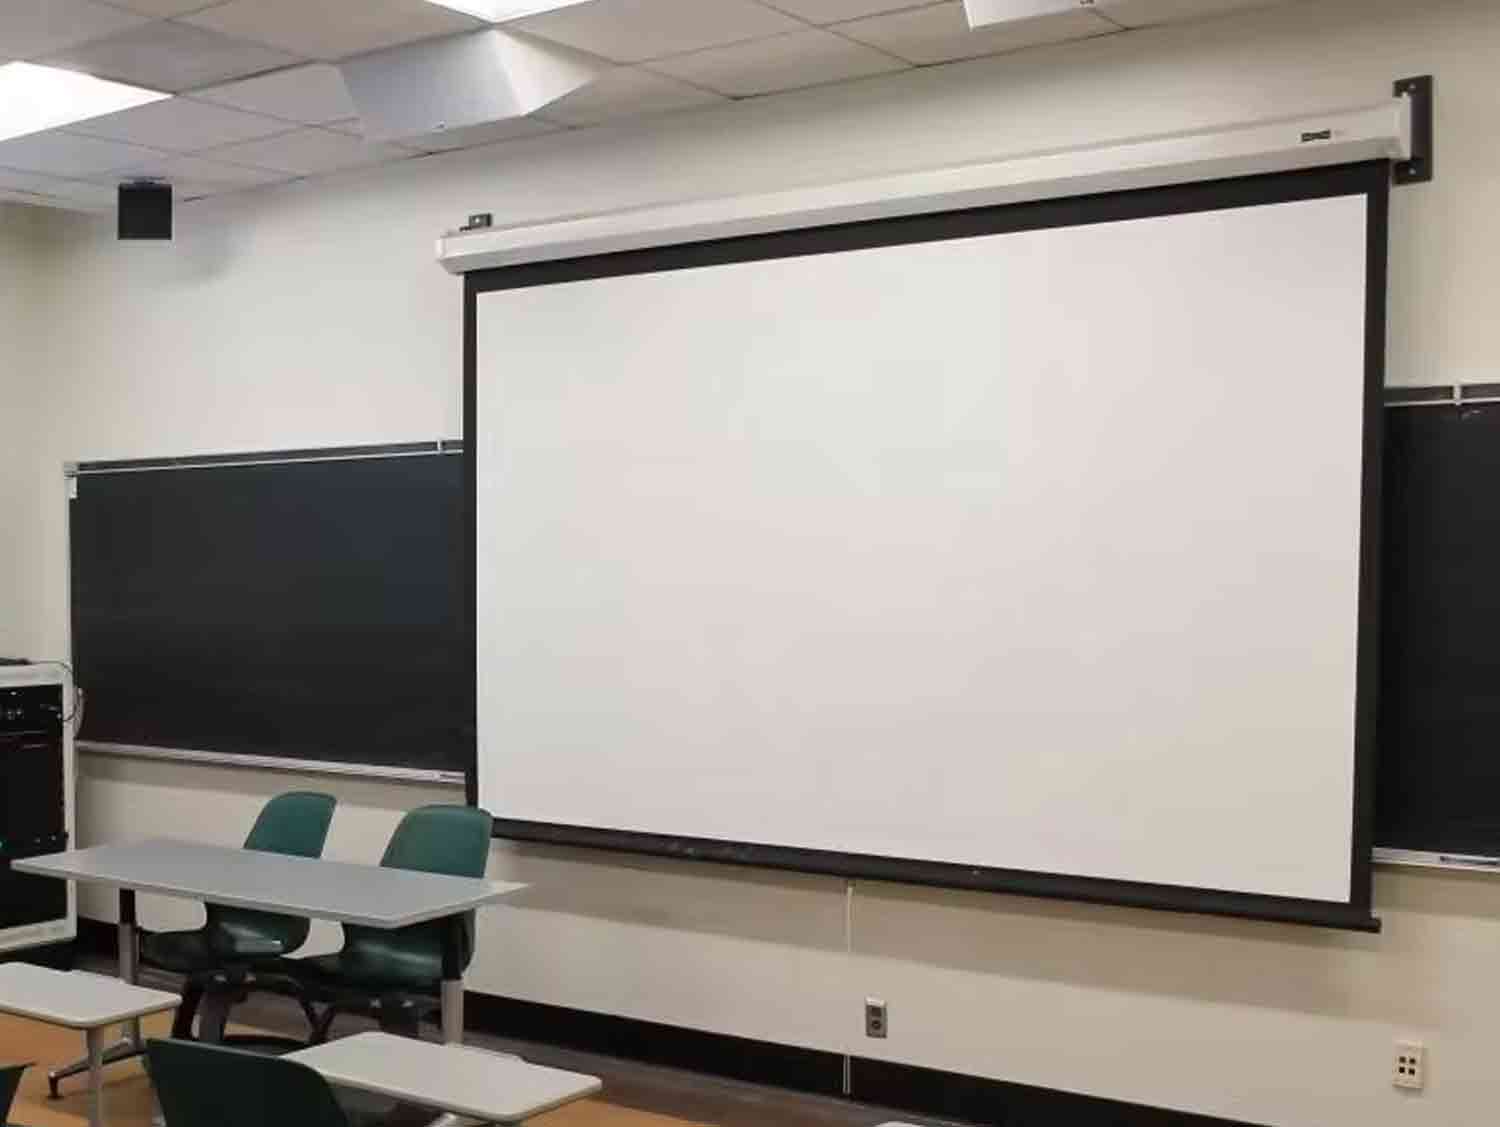 Manual Projector Screen "60x60"(5x5) for High-Quality Viewing Experience